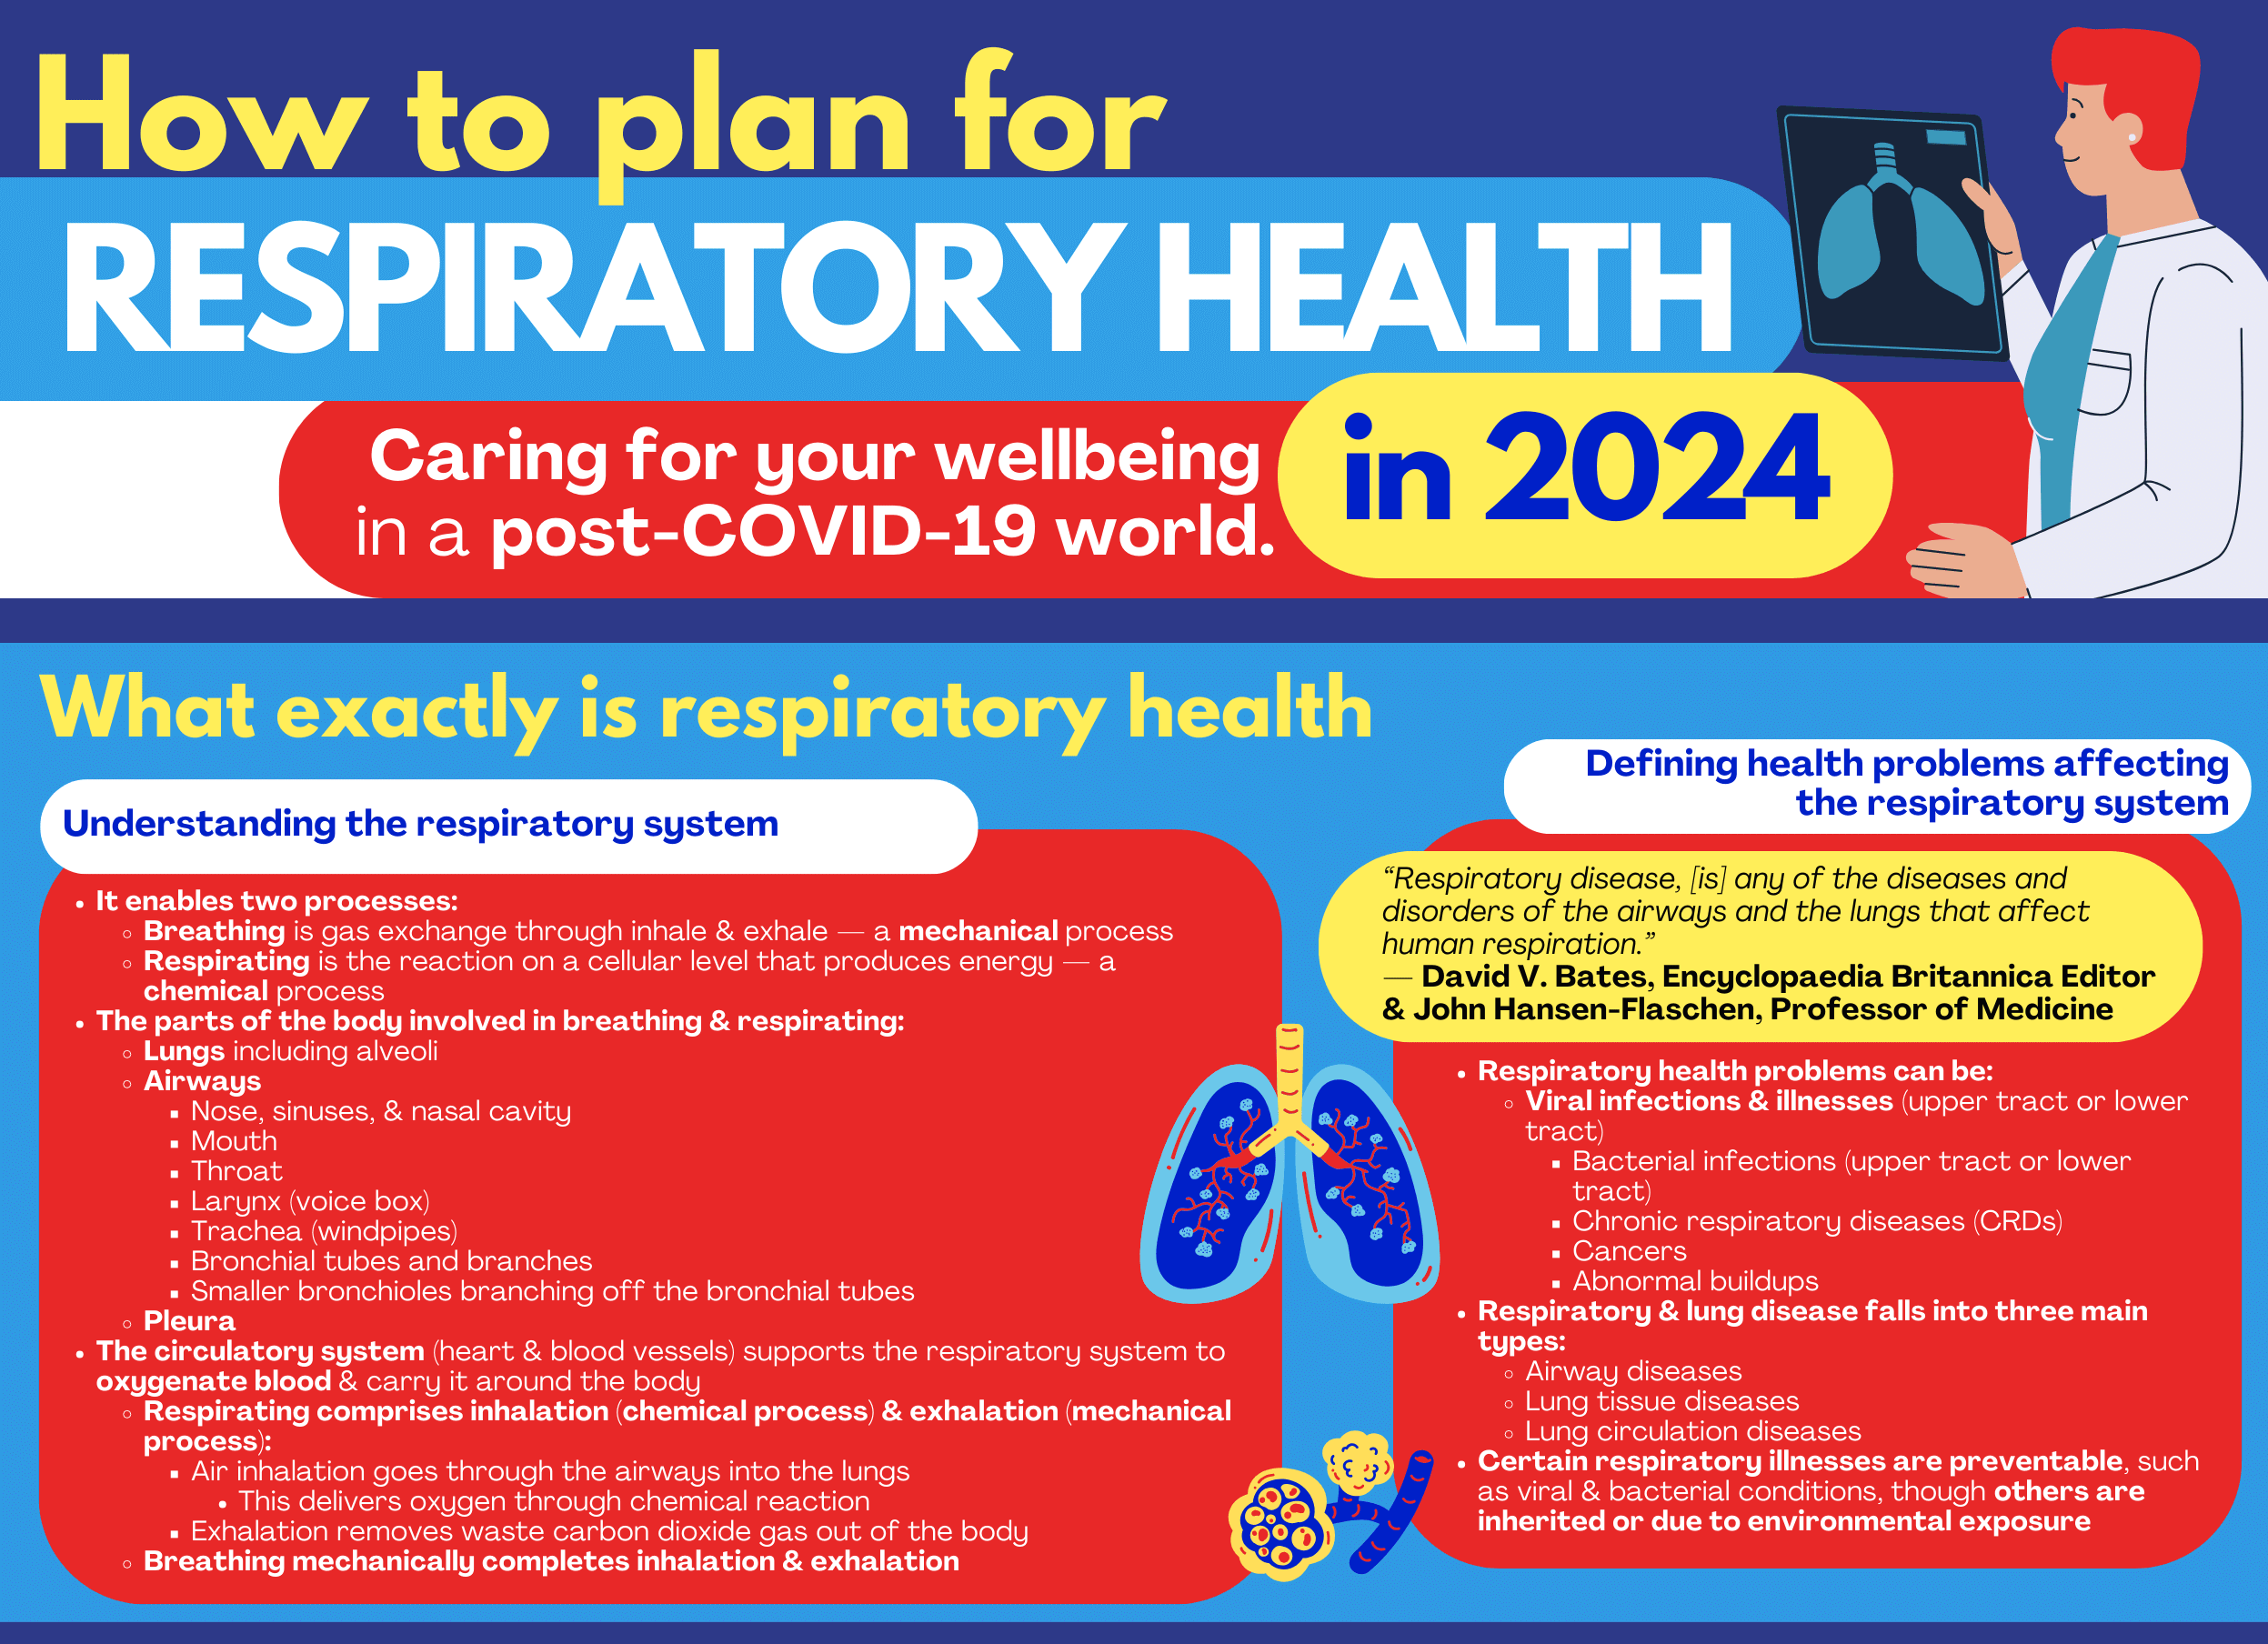 How To Plan For Respiratory Health